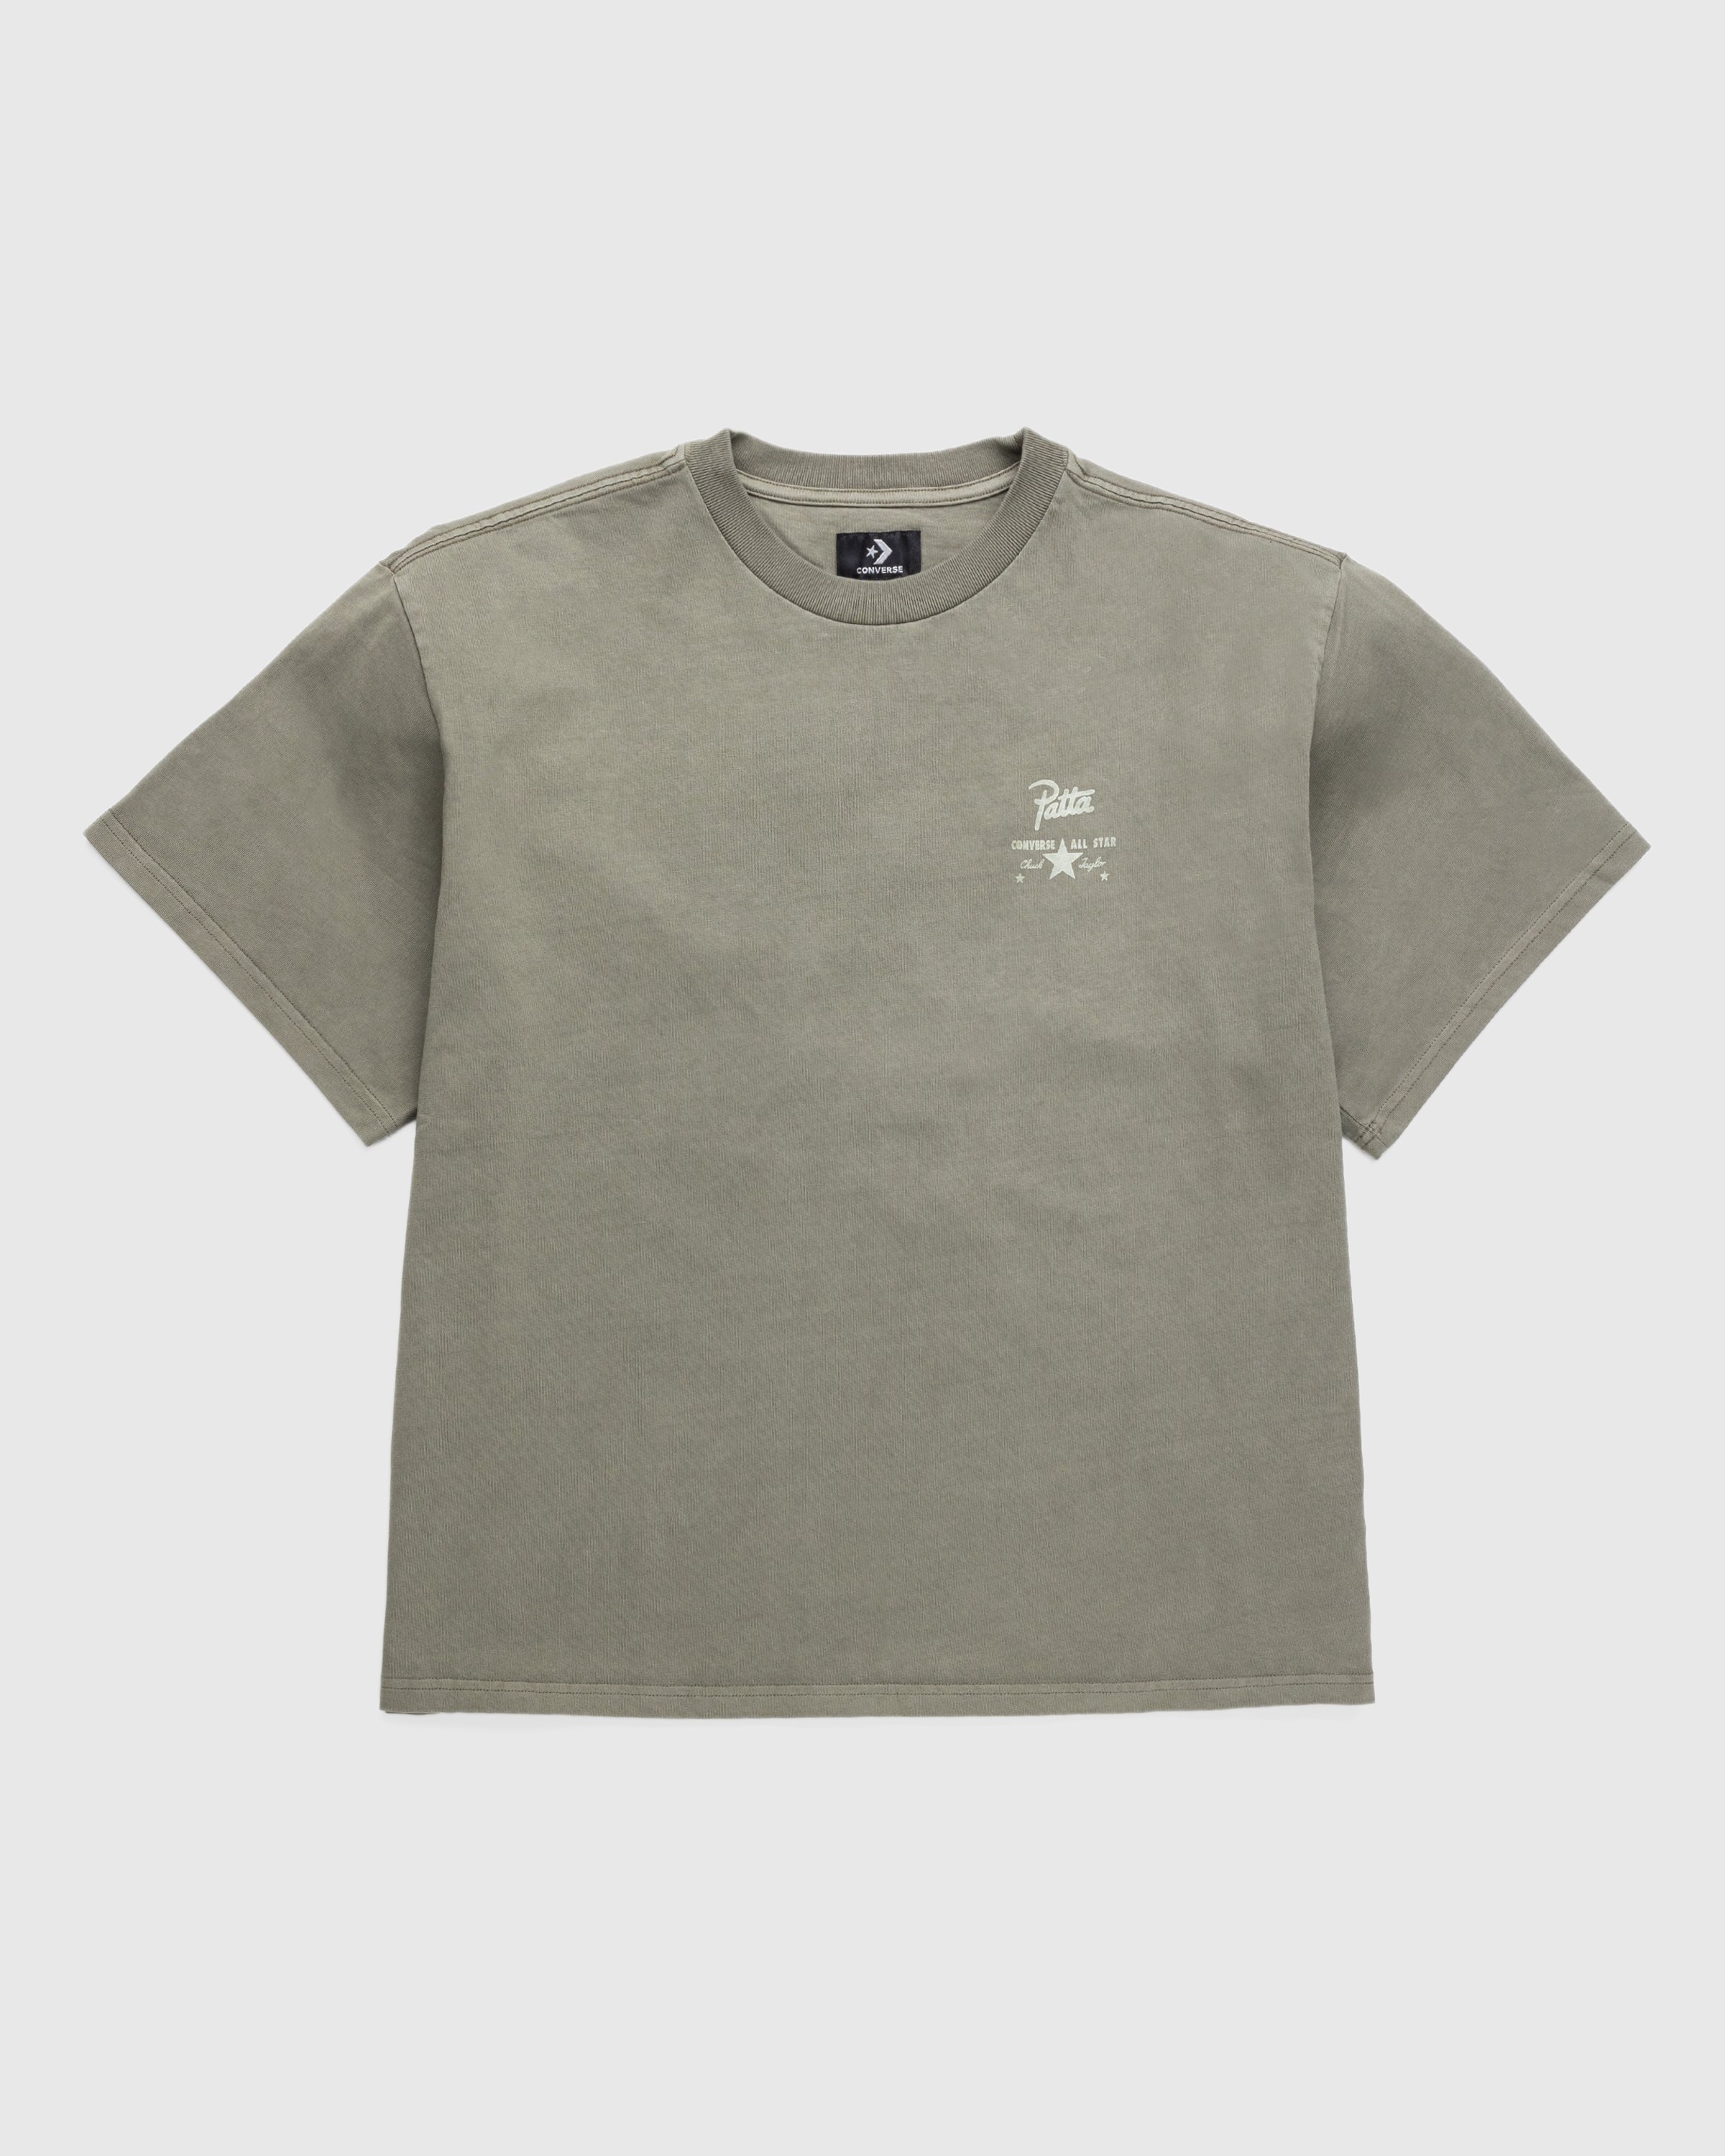 Patta x Converse - Tee Burnt Olive - Clothing - Brown - Image 2